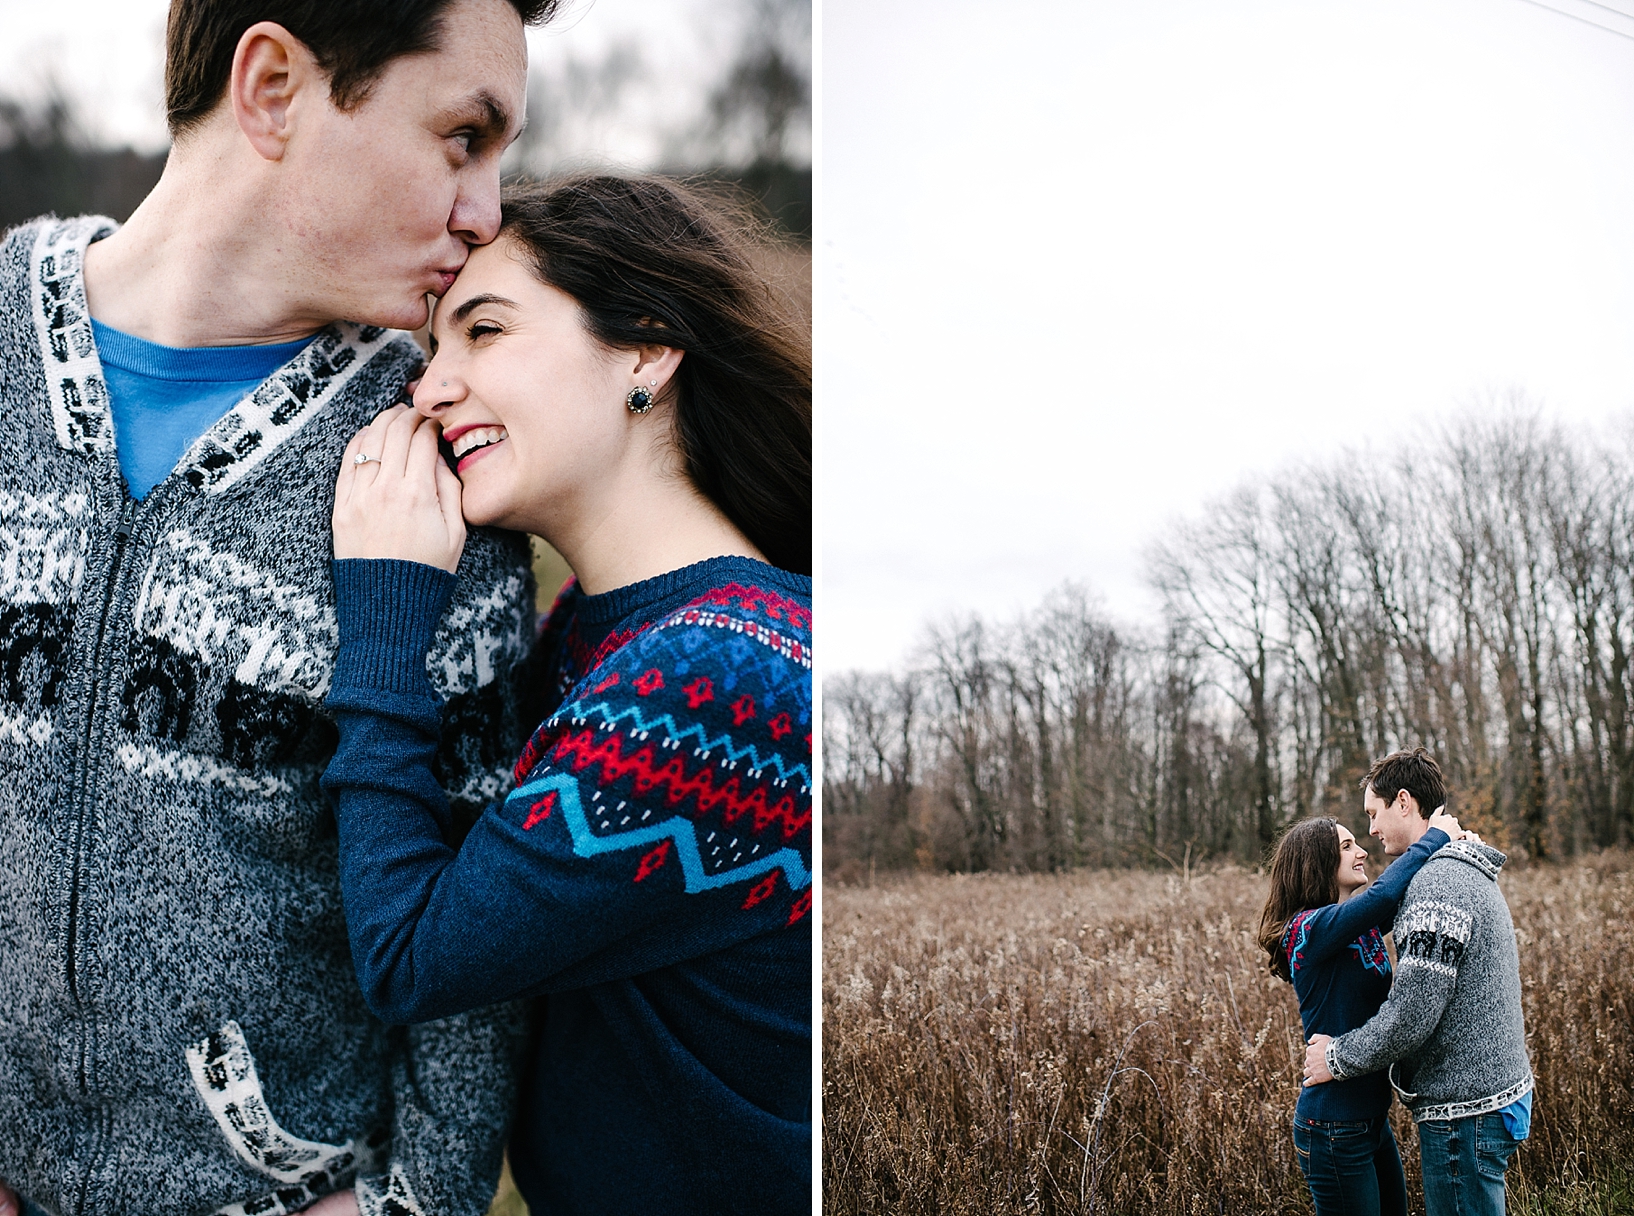 guy in grey sweater kissing girl in blue sweater on forehead while she laughs